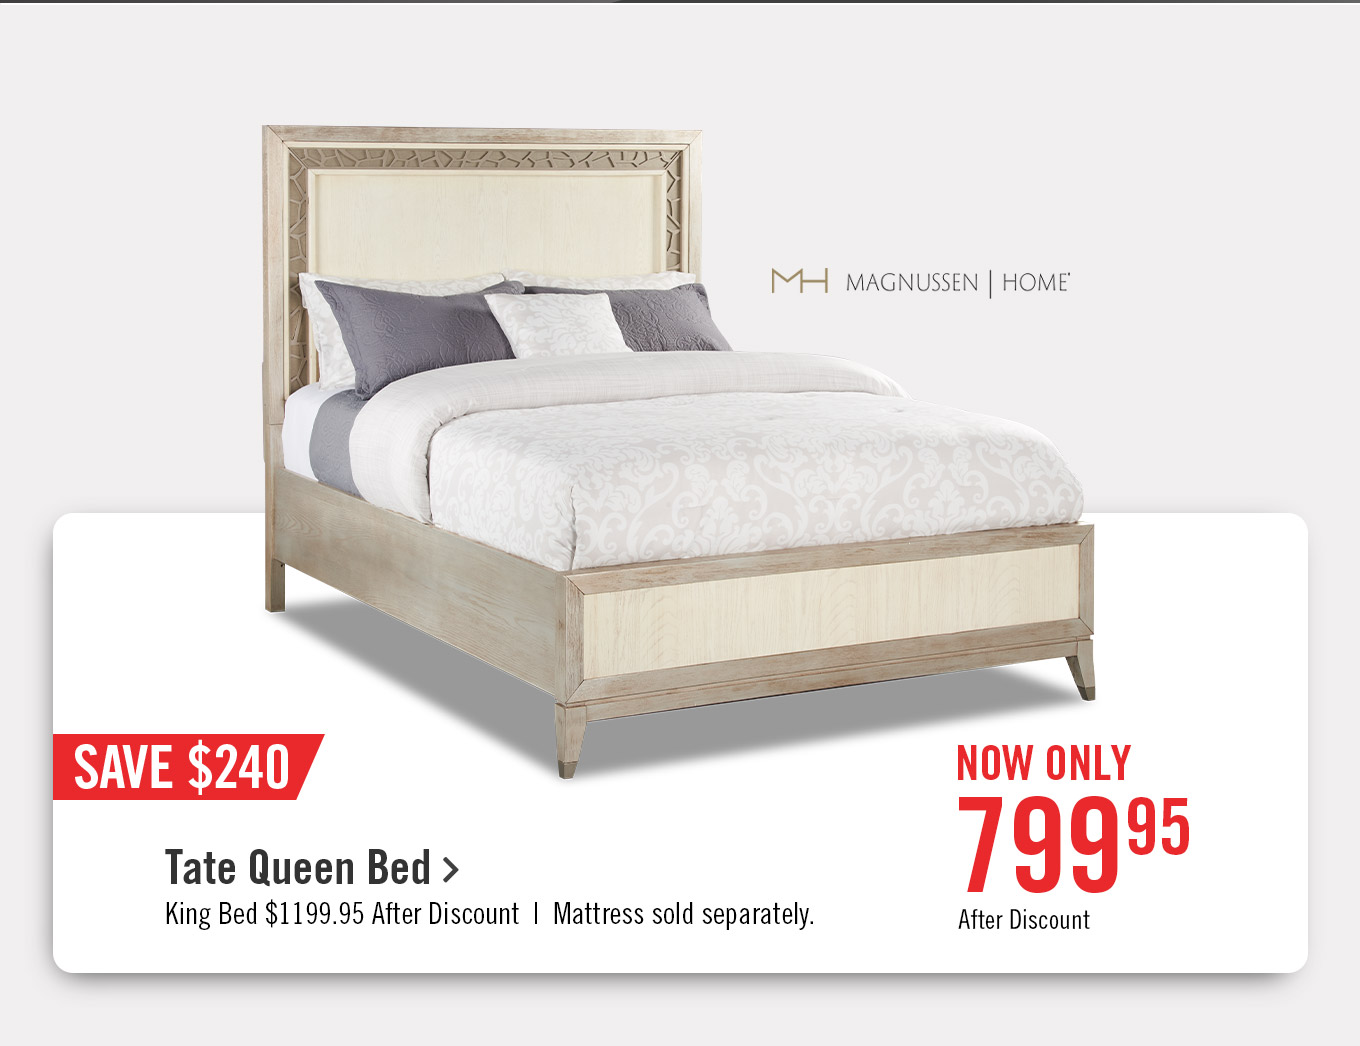 Tate Queen Bed.